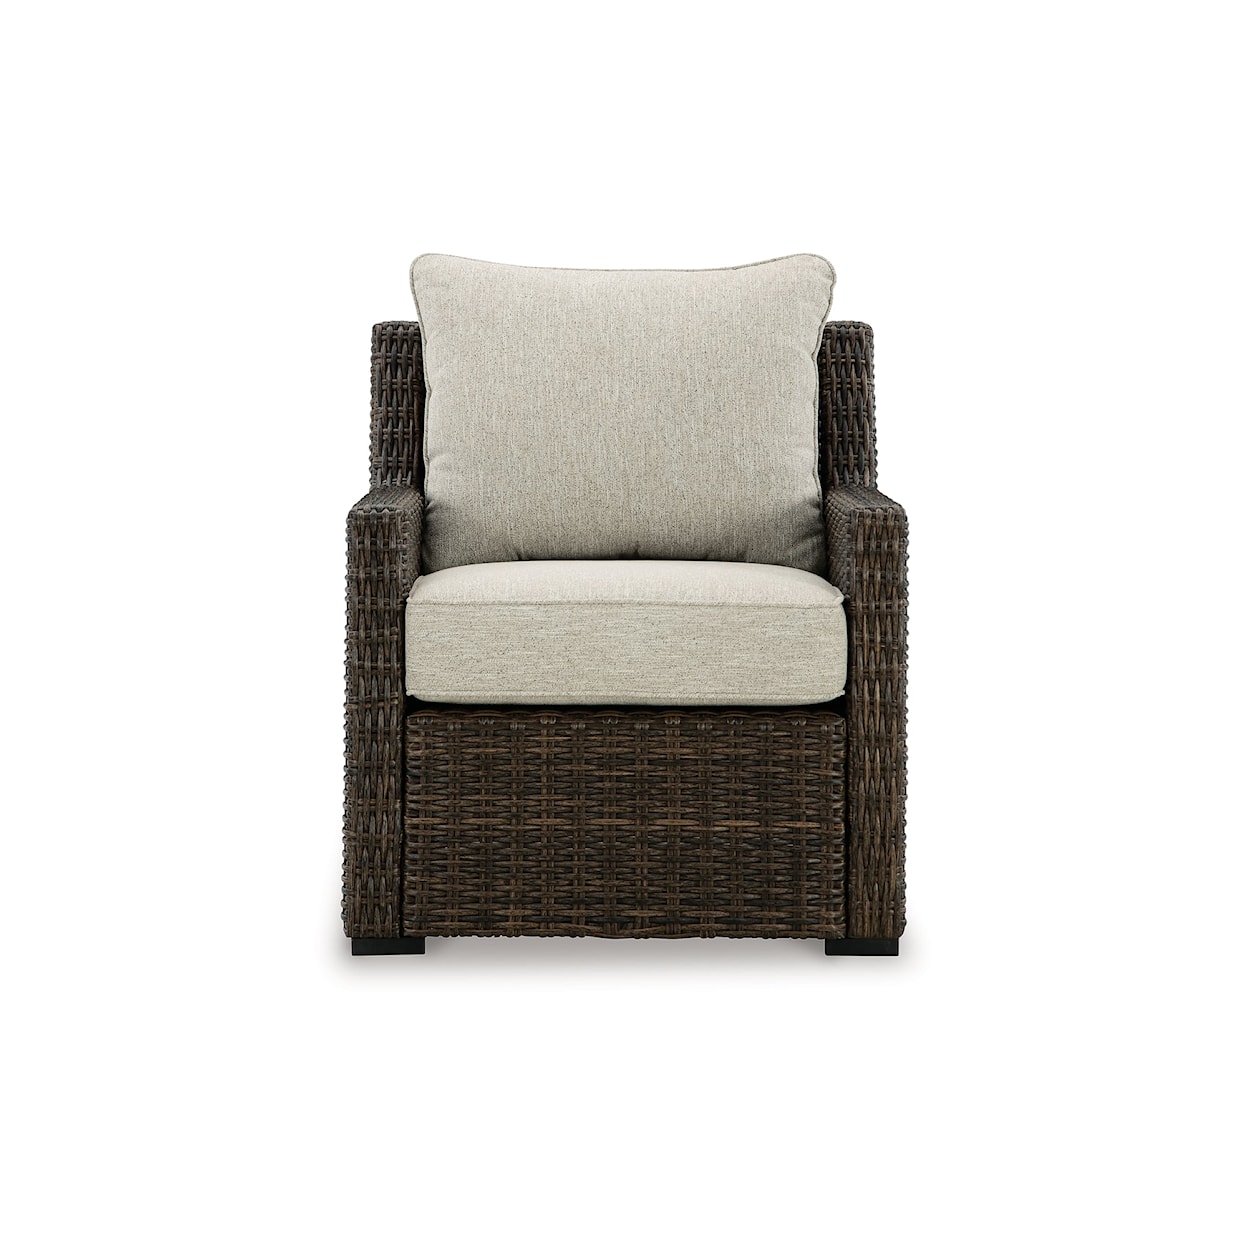 Signature Brook Ranch Outdoor Lounge Chair w/ Cushion